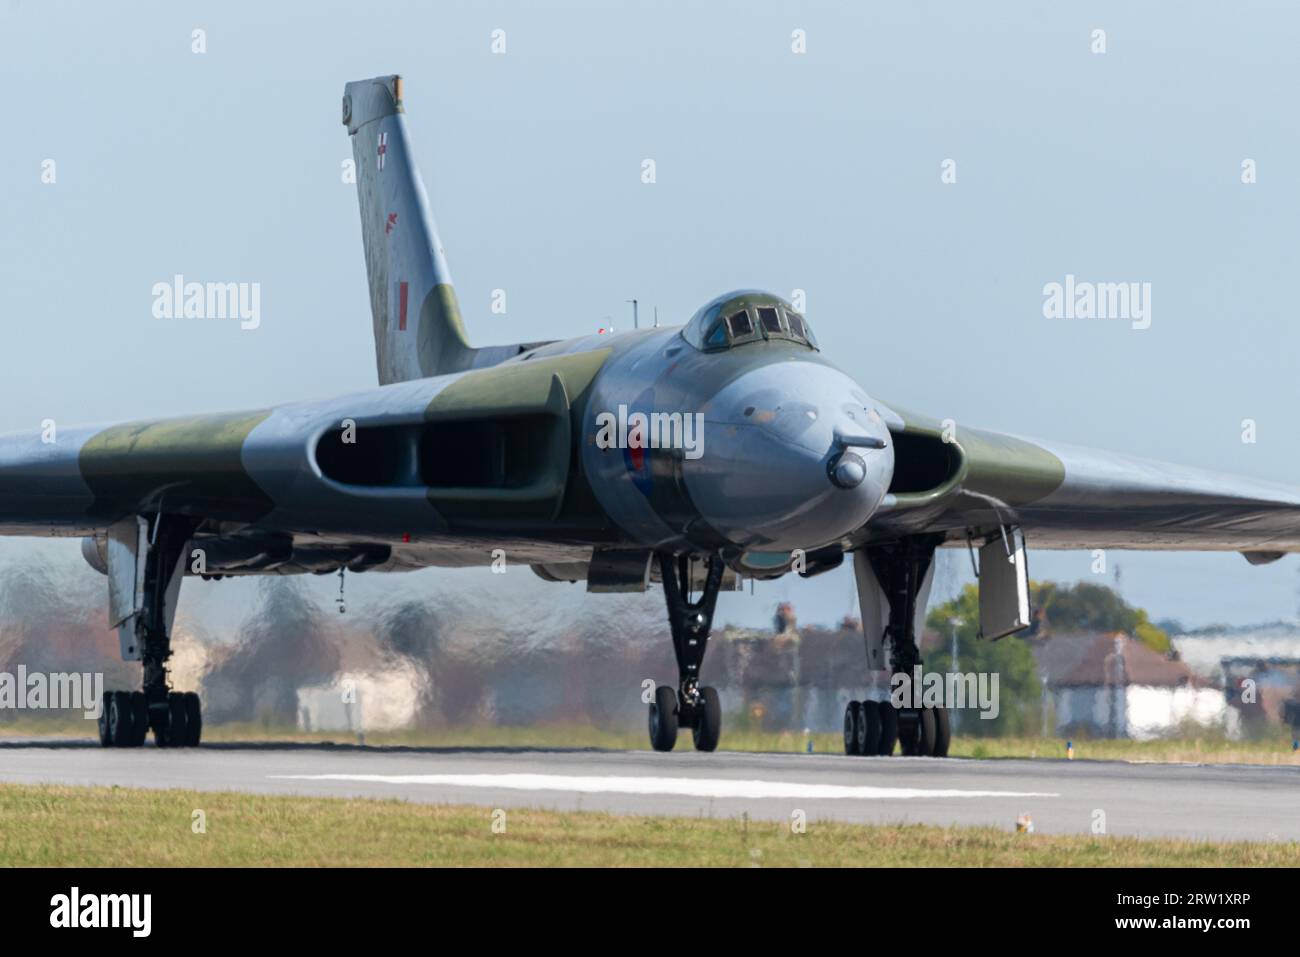 London Southend Airport, Essex, UK. 16th Sep, 2023. A former RAF Cold War Avro Vulcan B2 jet bomber has been run down the runway at London Southend Airport for a special event. The aircraft, serial number XL426, first flew in 1962 & served with the RAF until 1986. It has since been restored to ground running condition by the Vulcan Restoration Trust charity which is entirely public donation funded. A limited number of paying guests viewed from inside the airport. The Trust's operation and engineering teams are all volunteers Stock Photo